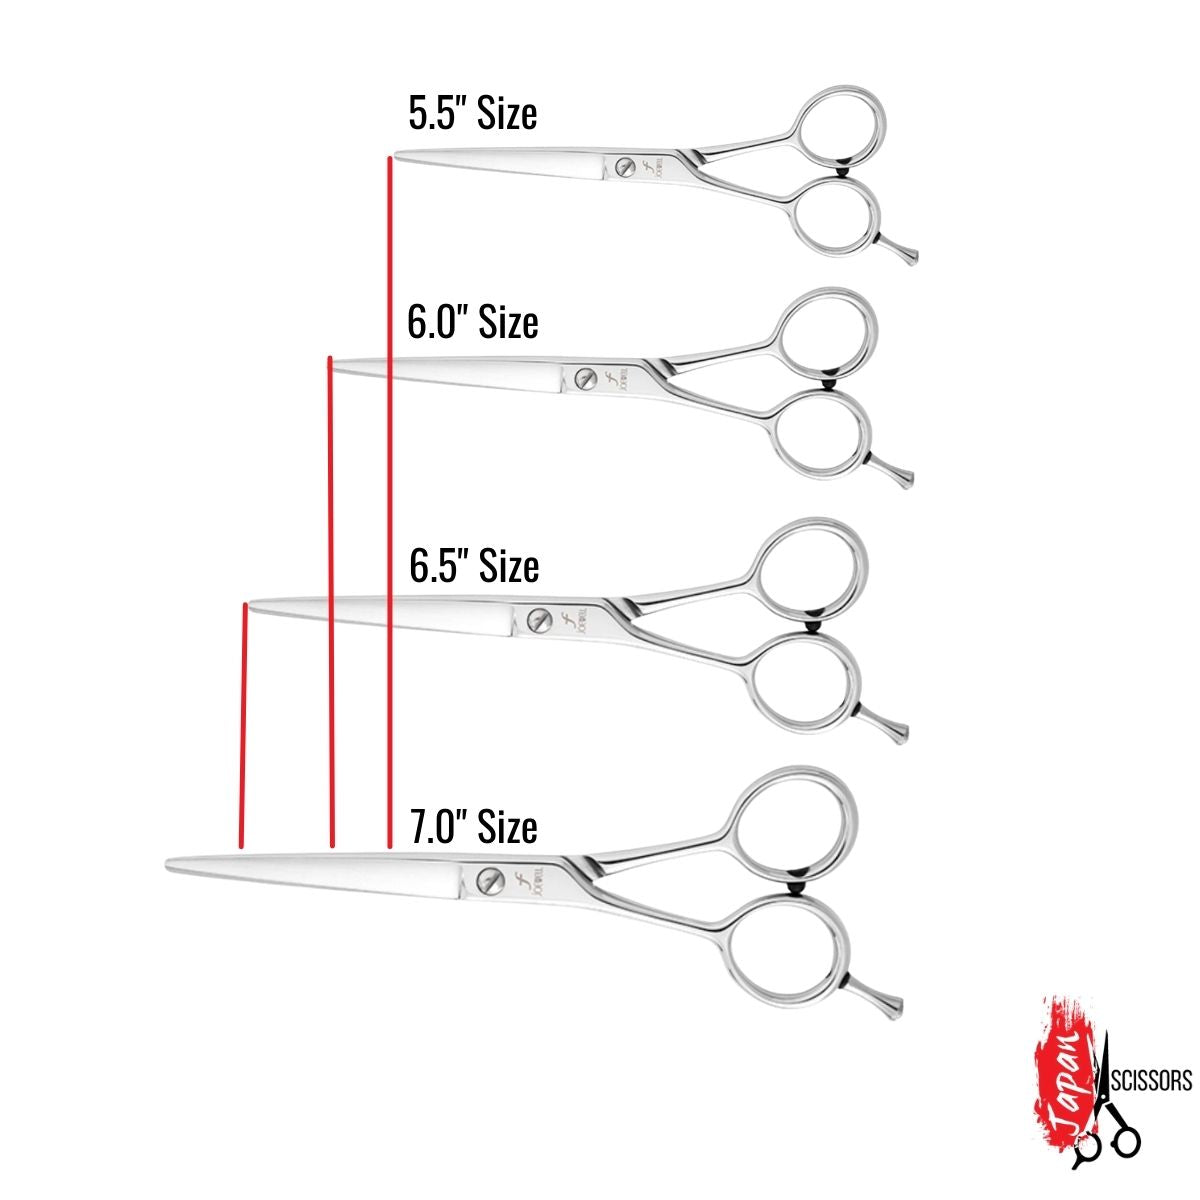 The Joewell hair cutting scissor sizes and length examples